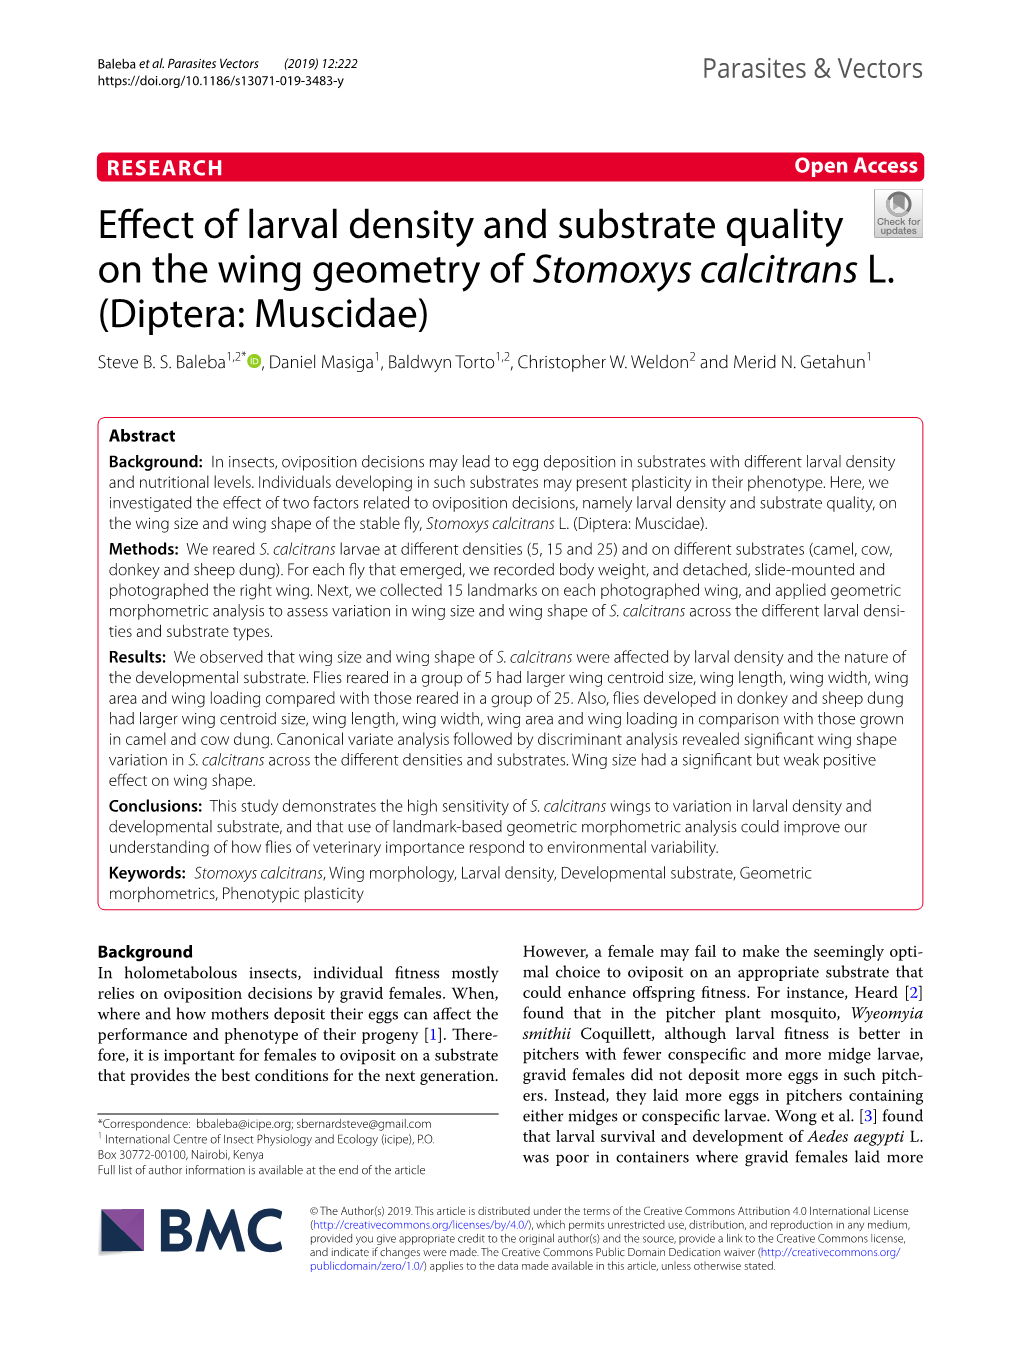 Effect of Larval Density and Substrate Quality on the Wing Geometry Of